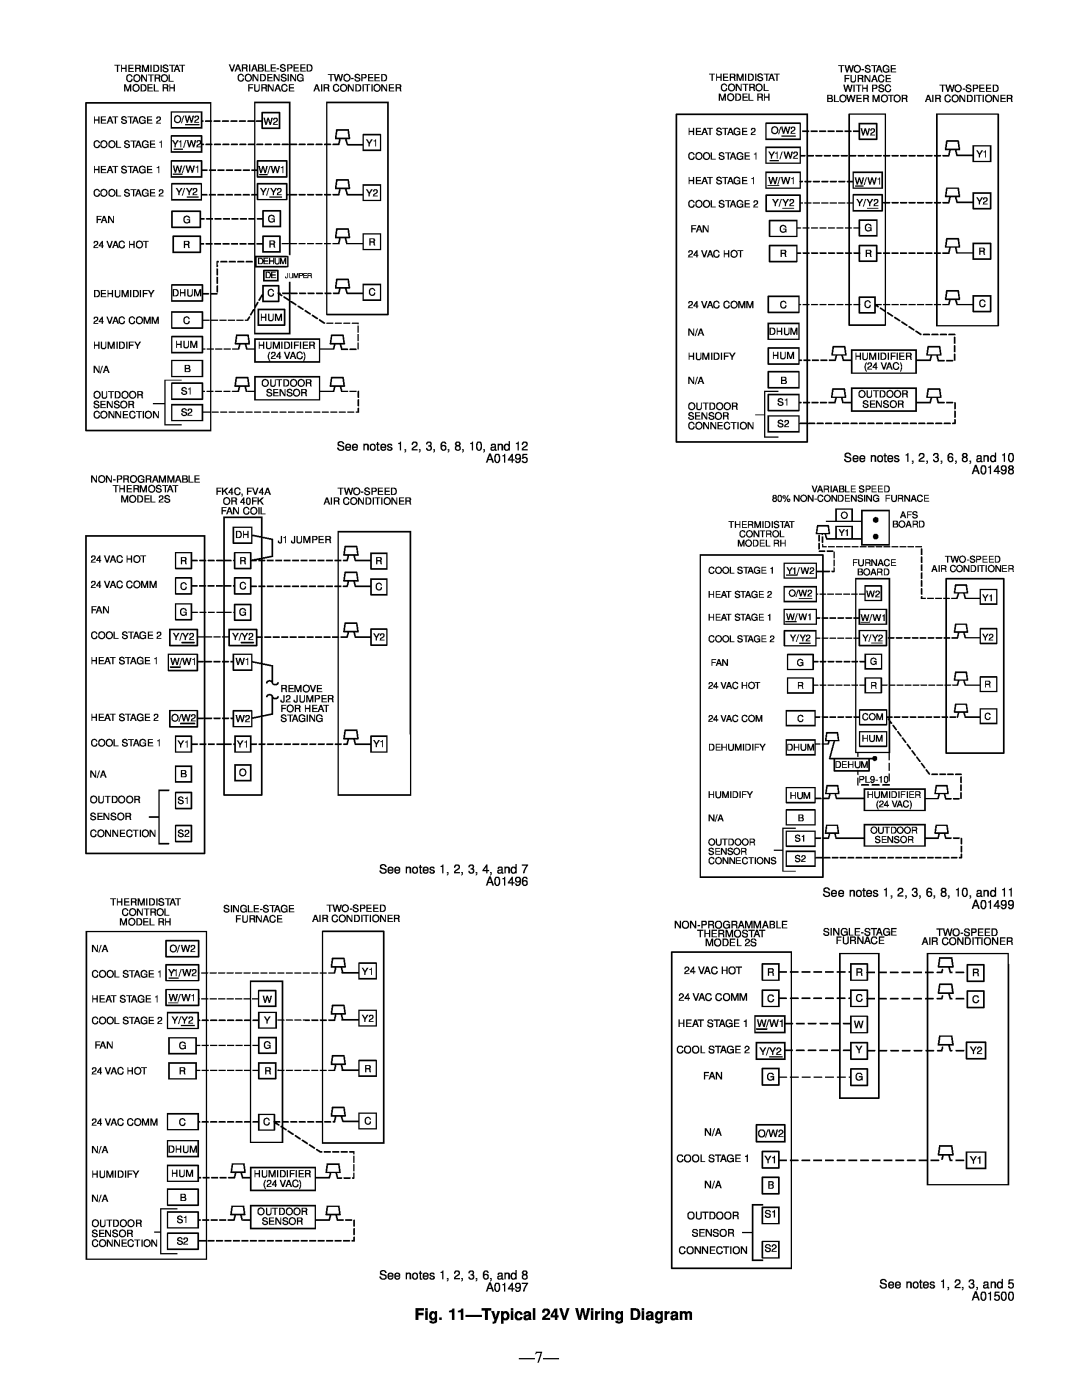 Bryant 598B Typical 24V Wiring Diagram, See notes 1, 2, 3, 6, 8, 10, and, A01495, See notes 1, 2, 3, 4, and, A01496 